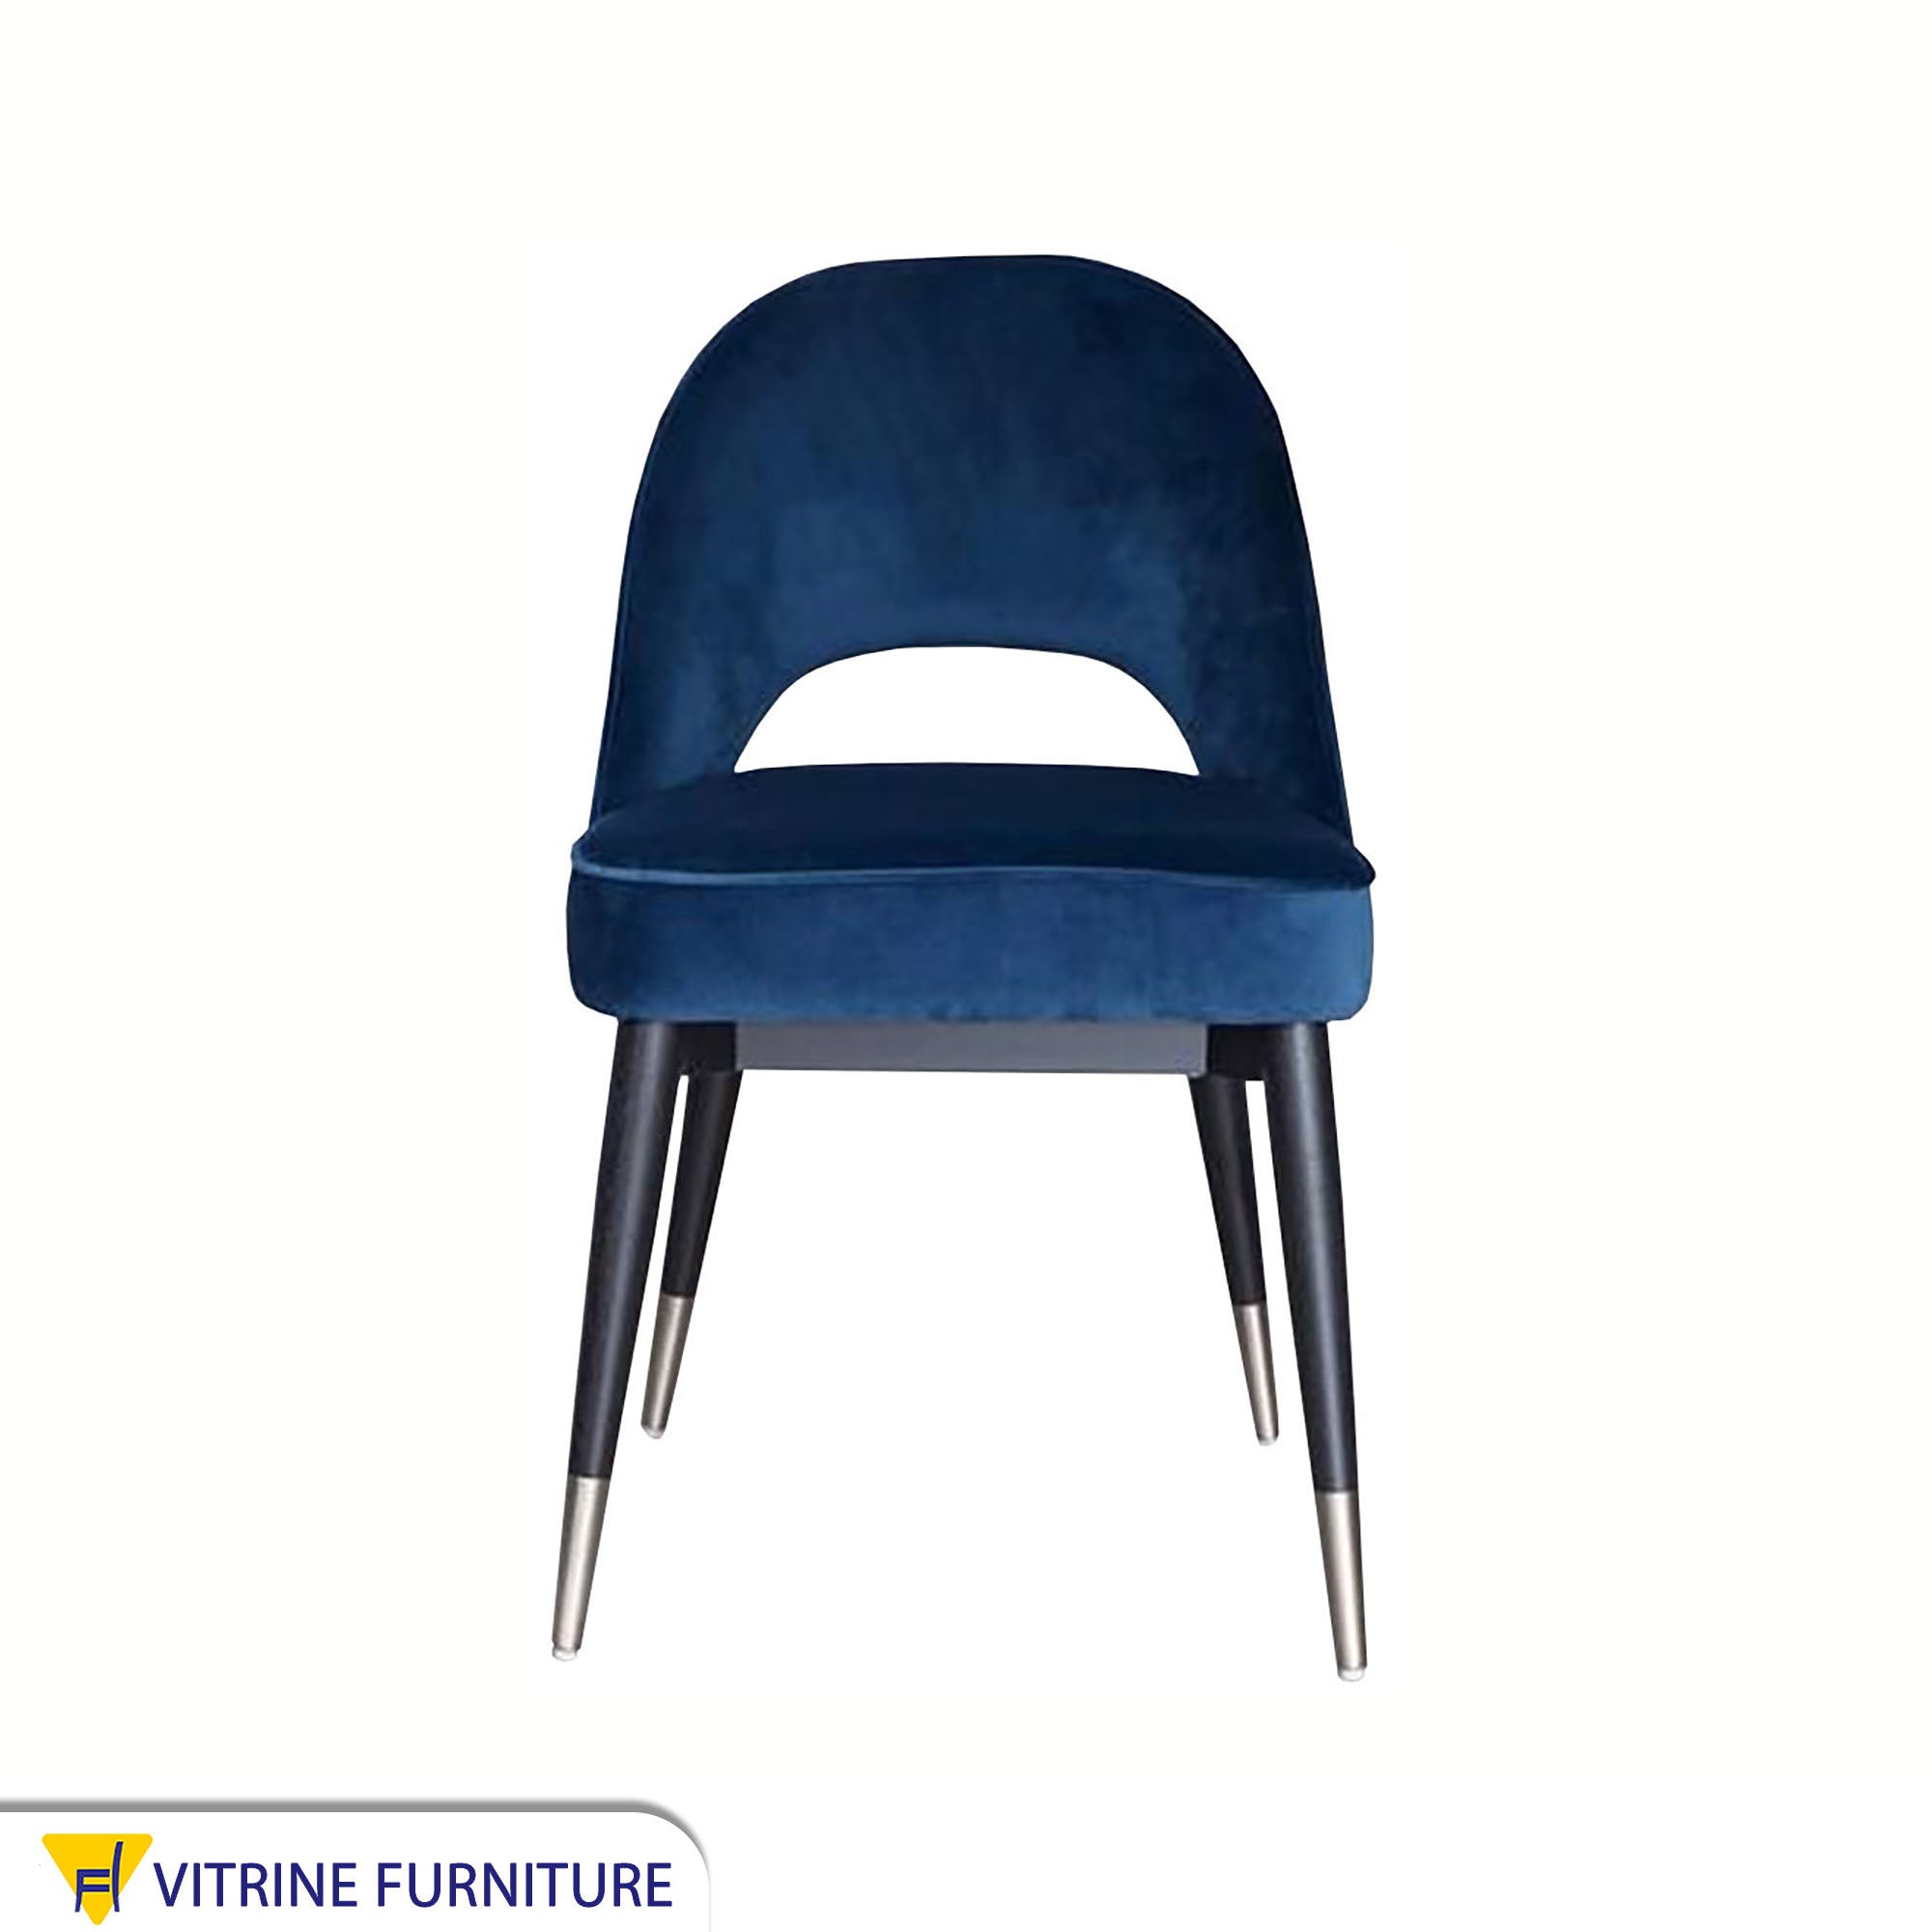 Navy blue upholstered chair